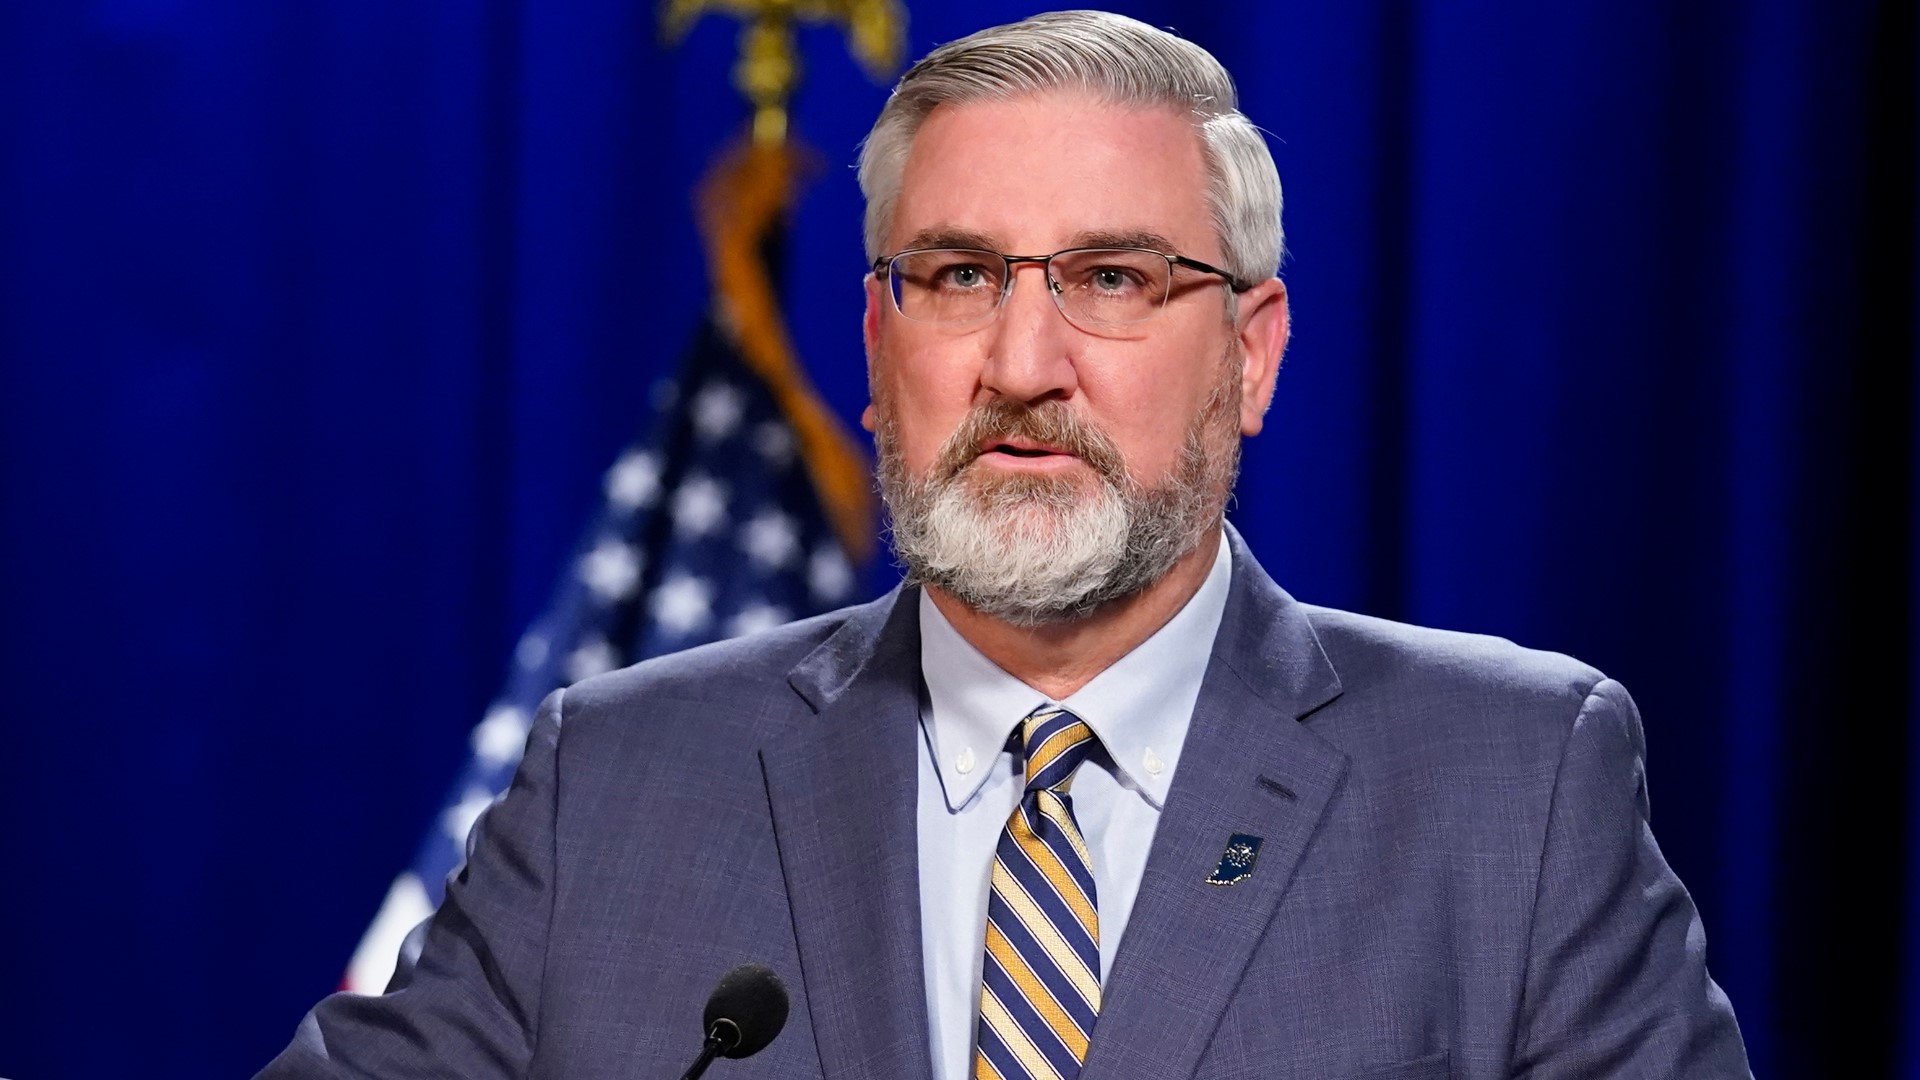 Gov. Eric Holcomb and state health leaders gave an update on the state's response to COVID-19 on Wednesday, March 24, 2021.